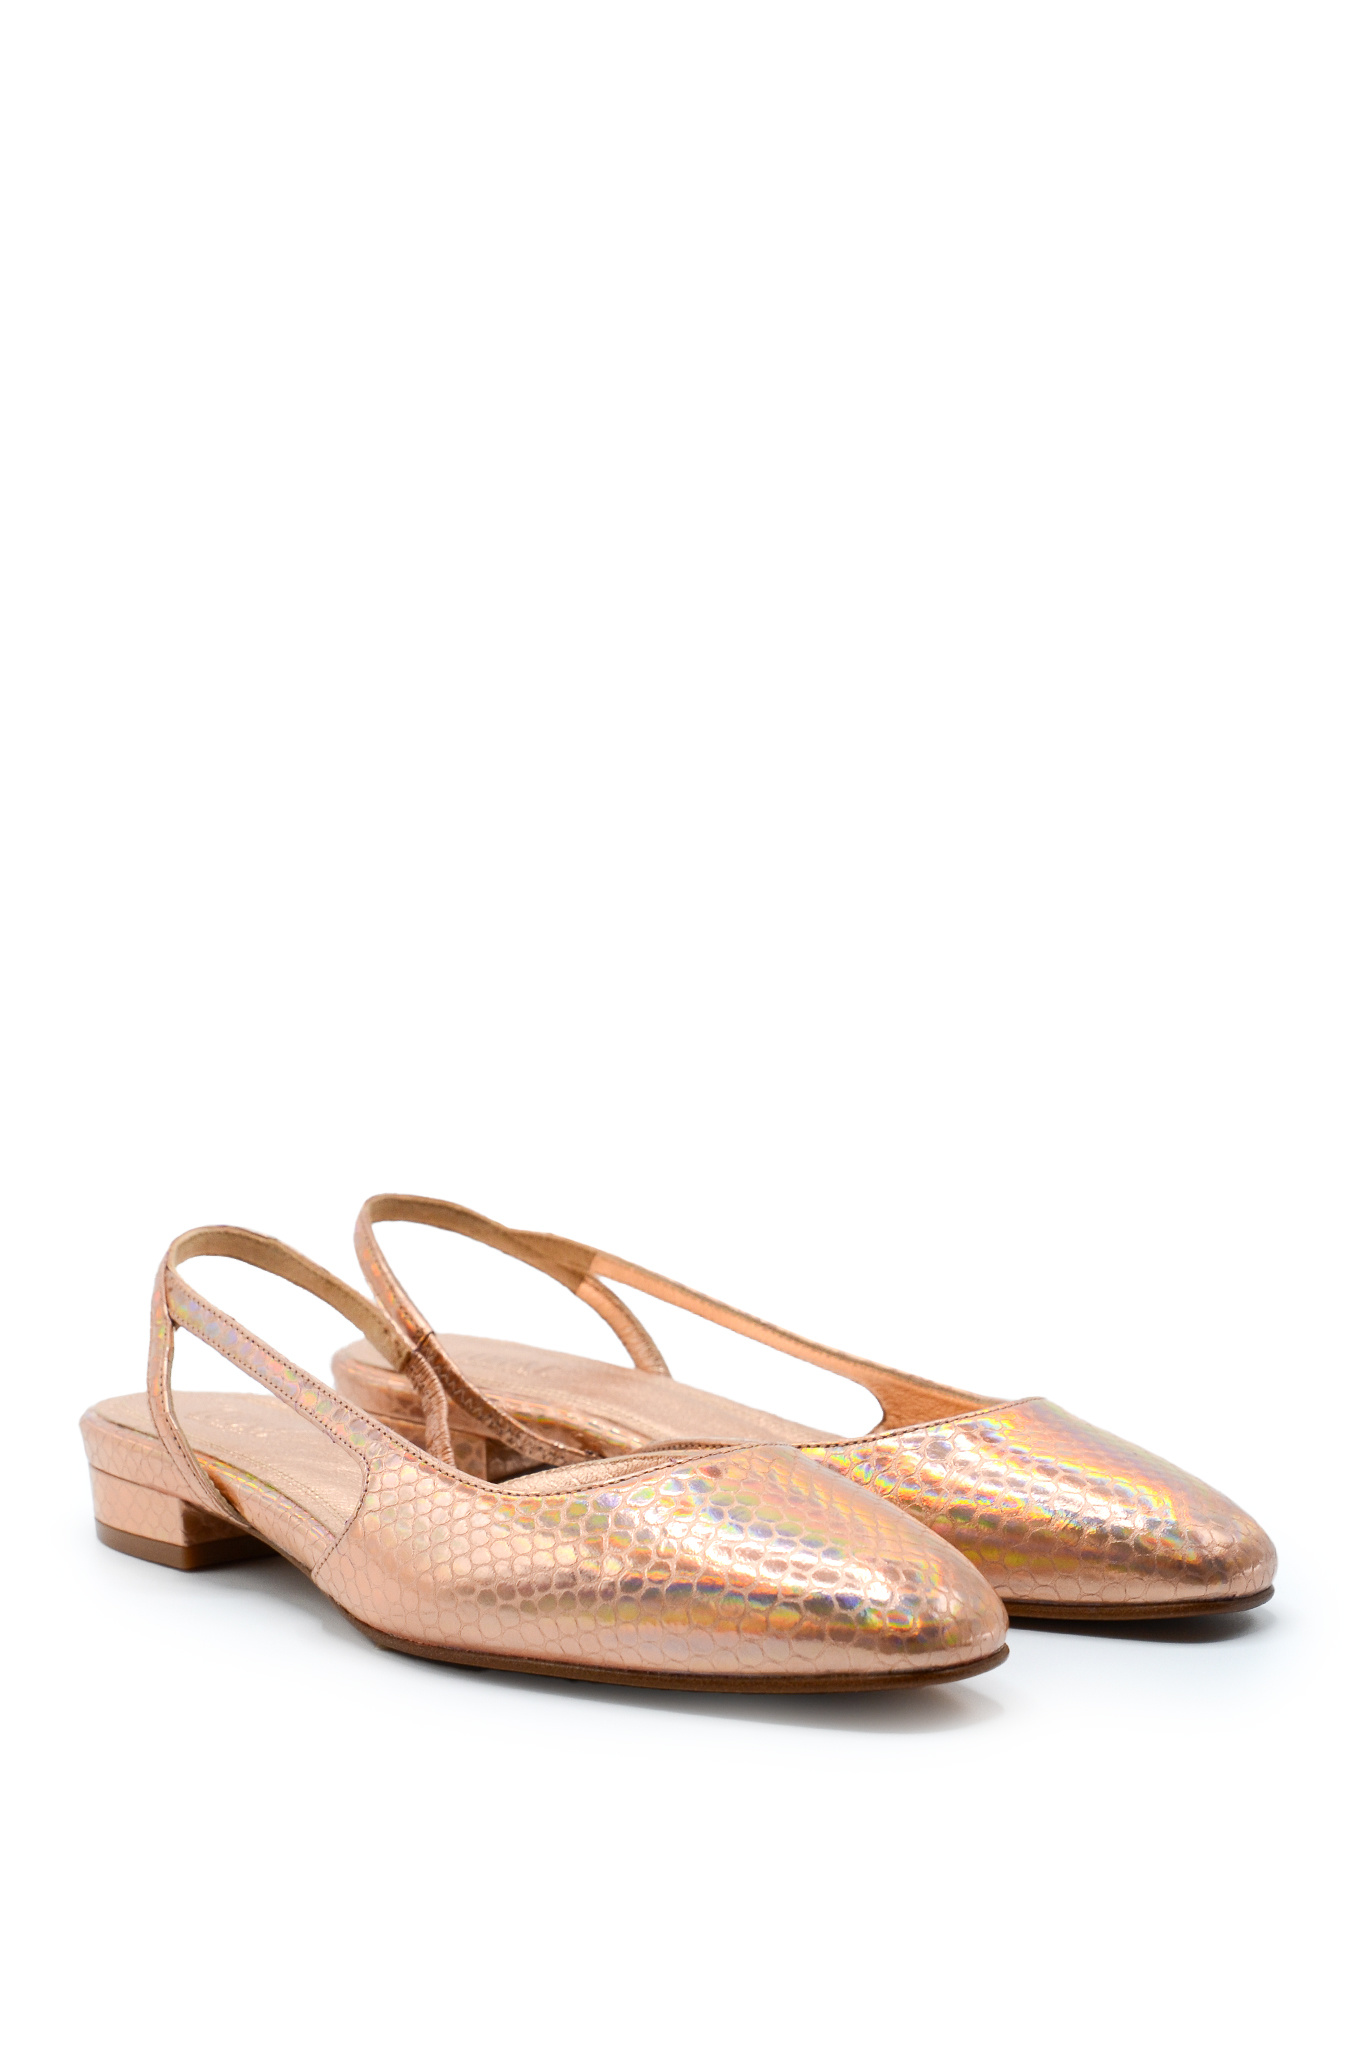 Lina Textured Sandals in Champagne-5